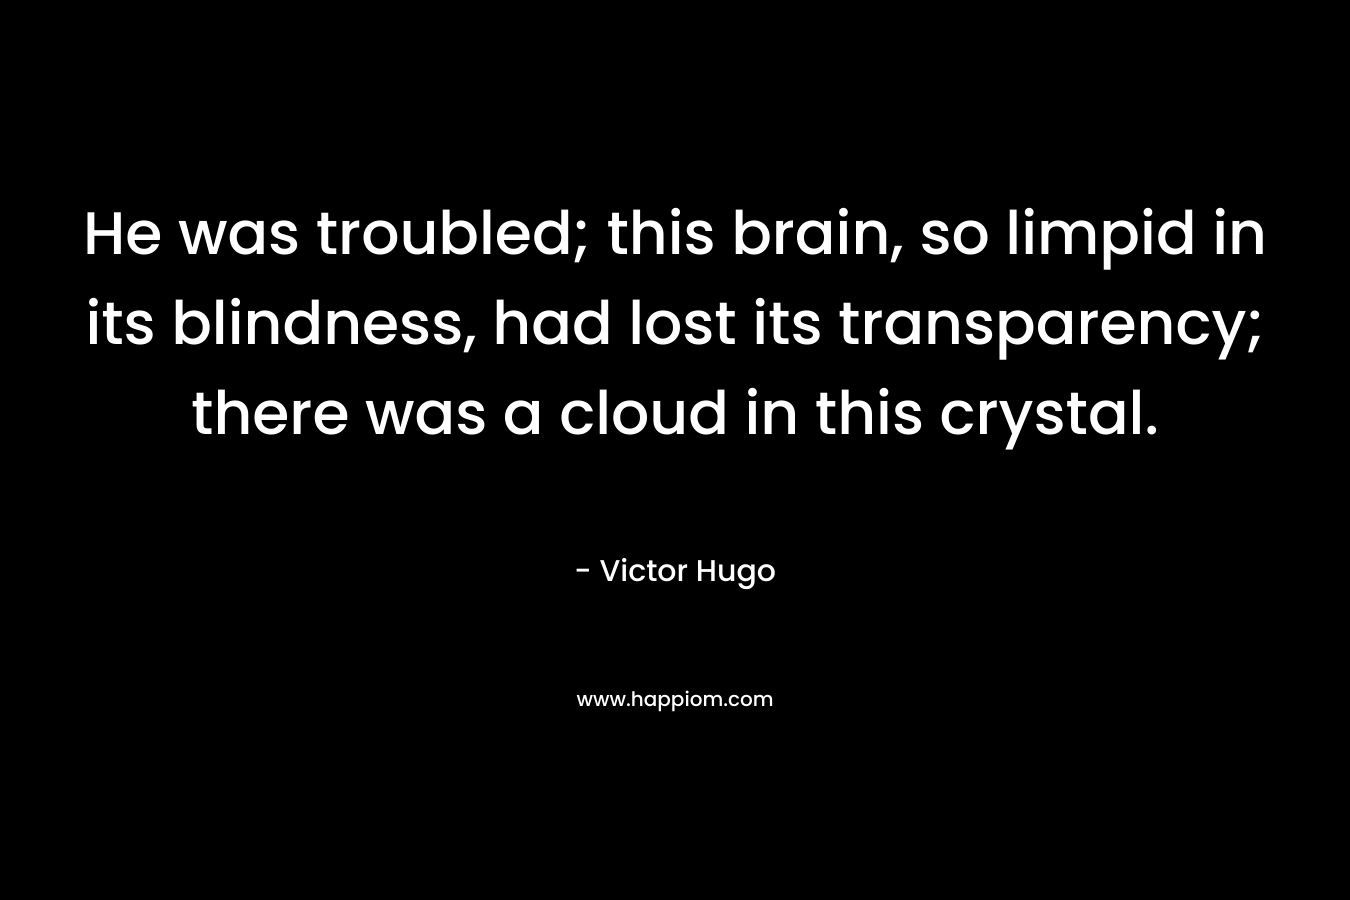 He was troubled; this brain, so limpid in its blindness, had lost its transparency; there was a cloud in this crystal.